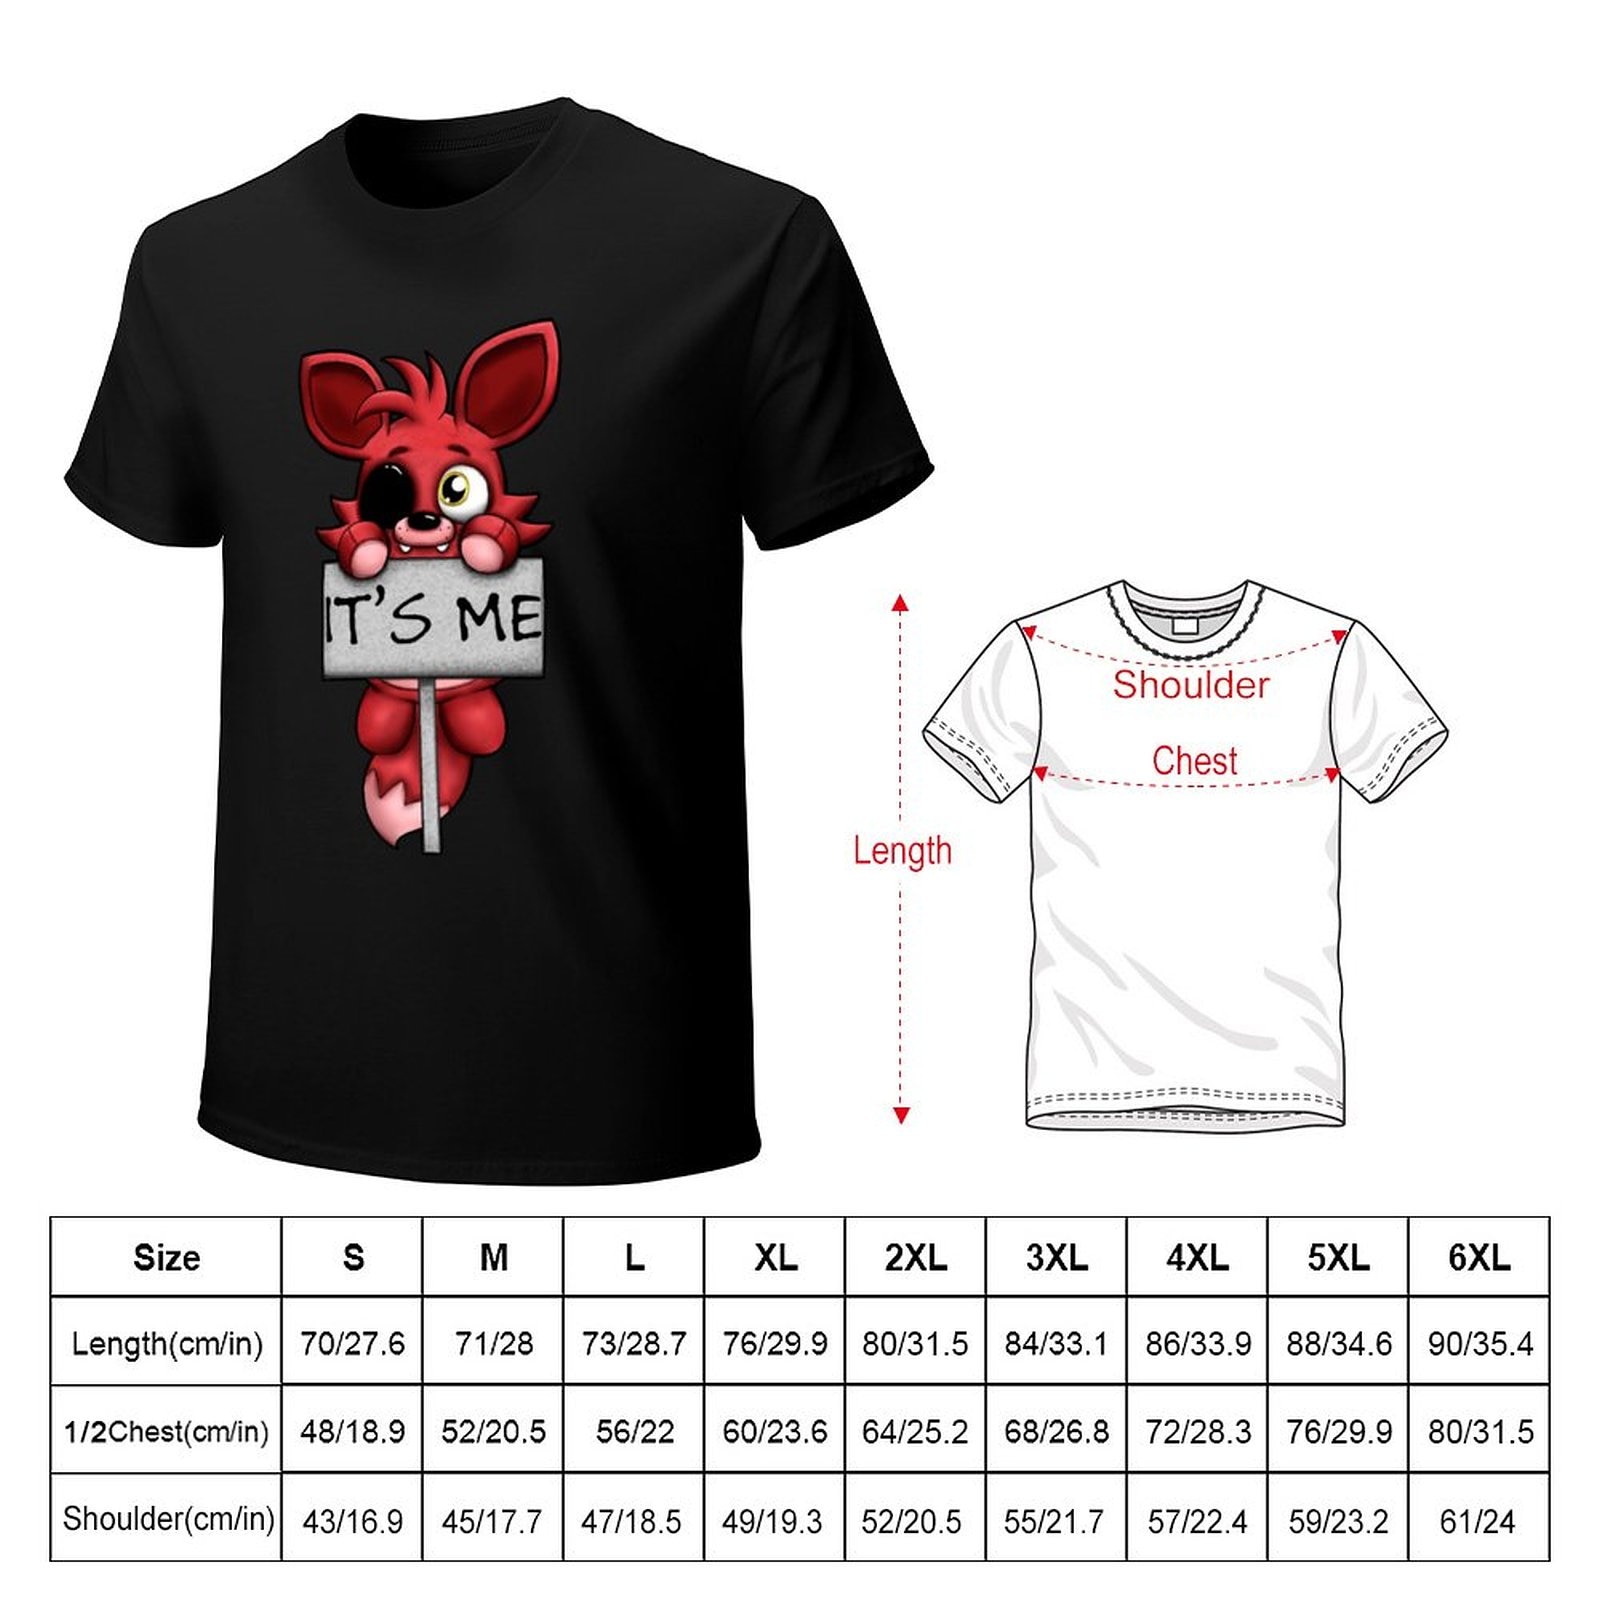 FNAF Plush Foxy T Shirt aesthetic clothes man clothes Aesthetic clothing Men s long sleeve t 1 - FNAF Plush